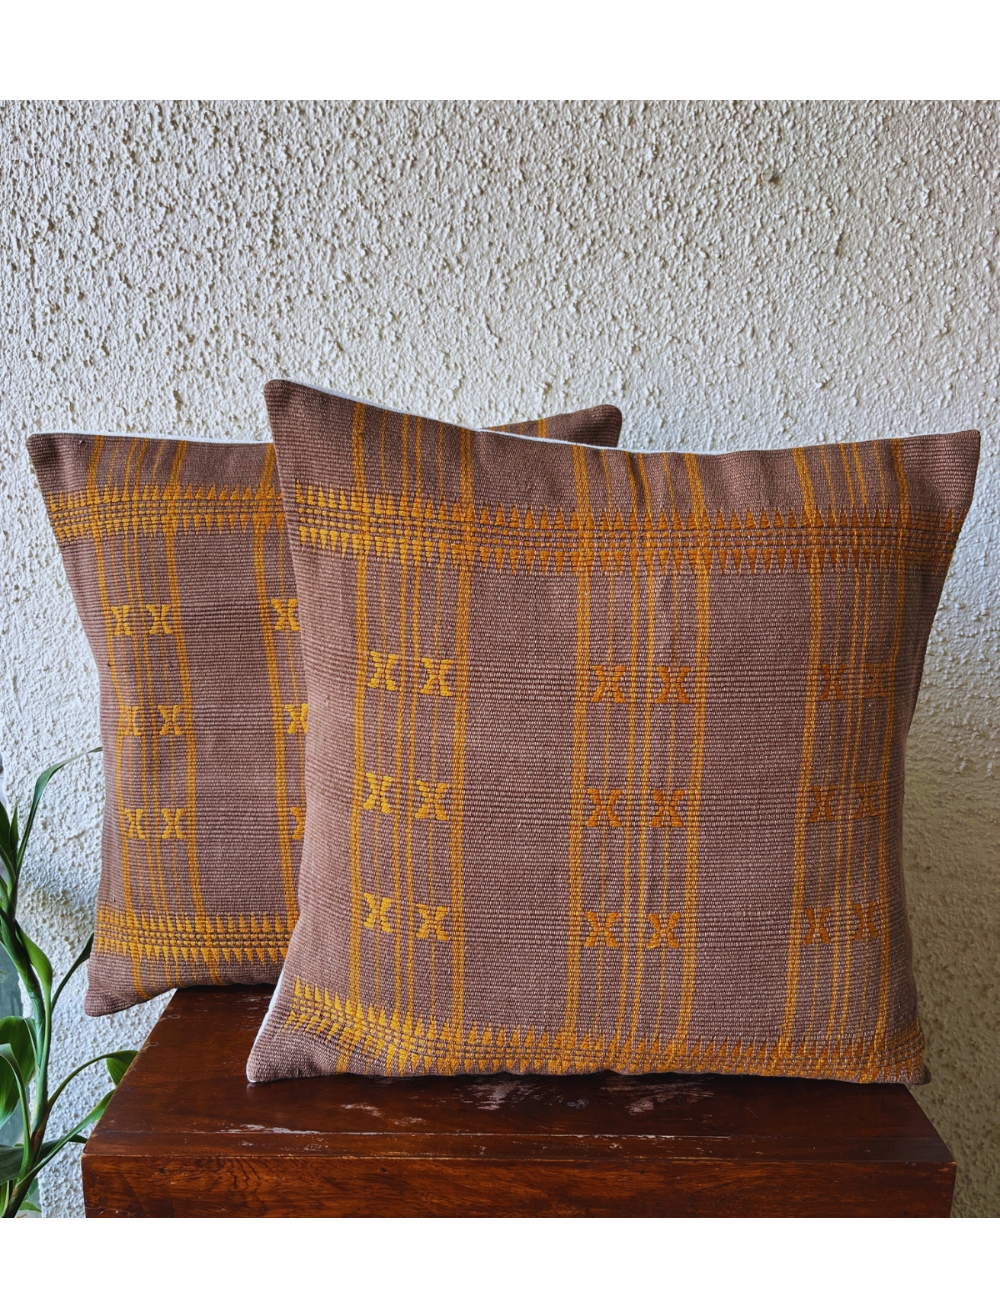 Chizami Weaves - Loin Loom Handwoven Cushion Cover Set in Brown with Gold Motif (Set of 2)